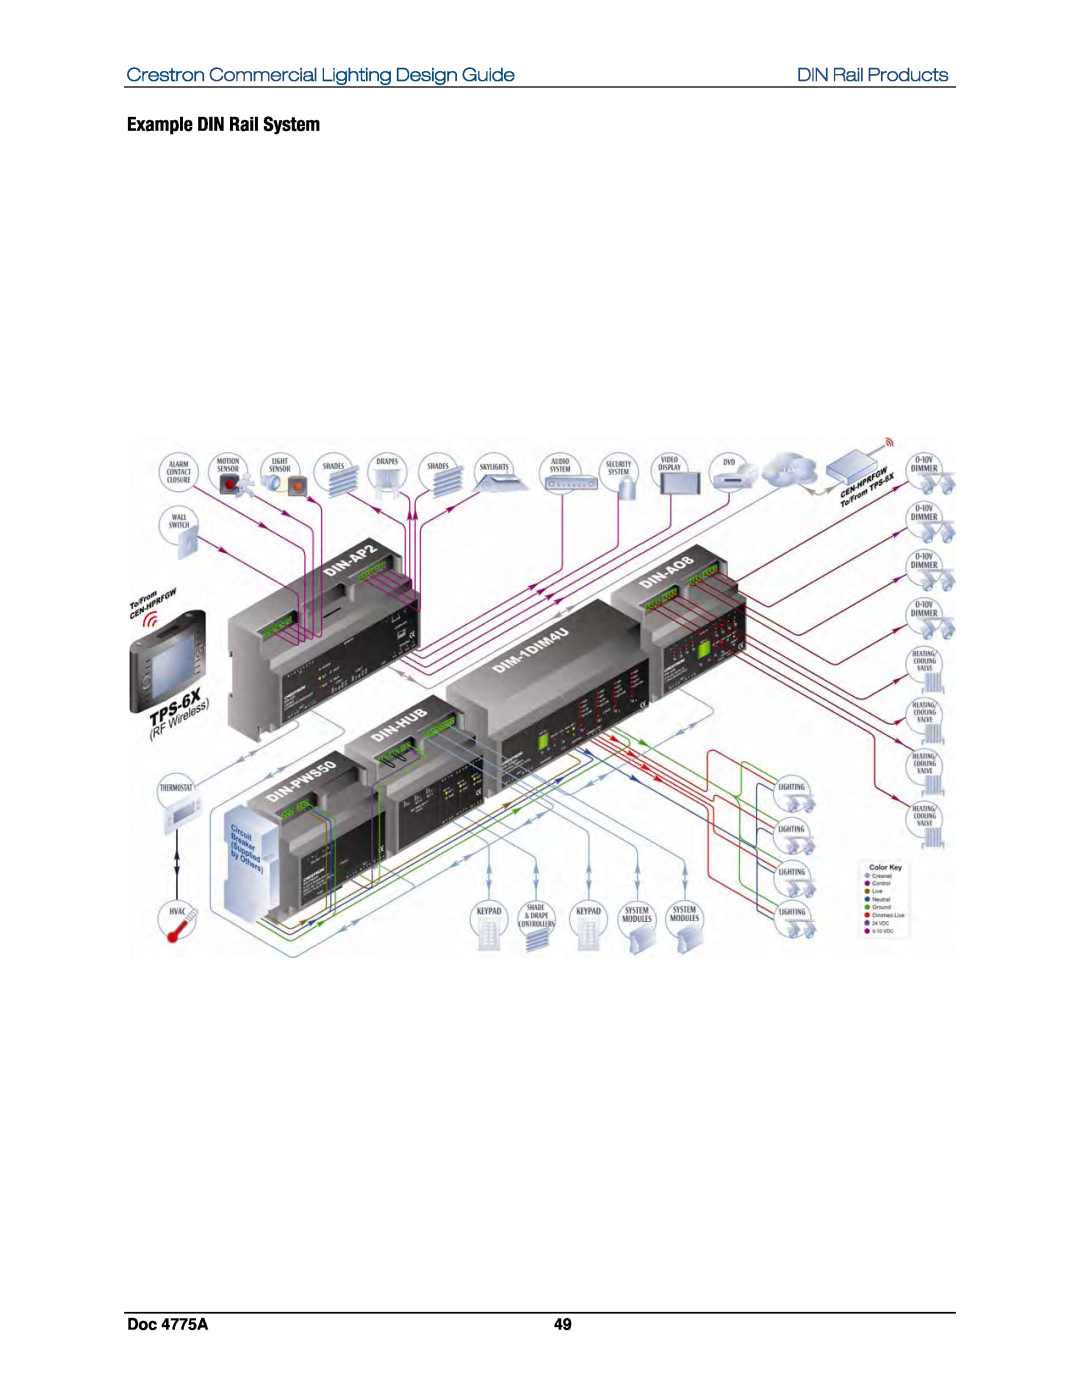 Crestron electronic GLPS-HSW-FT Example DIN Rail System, Crestron Commercial Lighting Design Guide, DIN Rail Products 